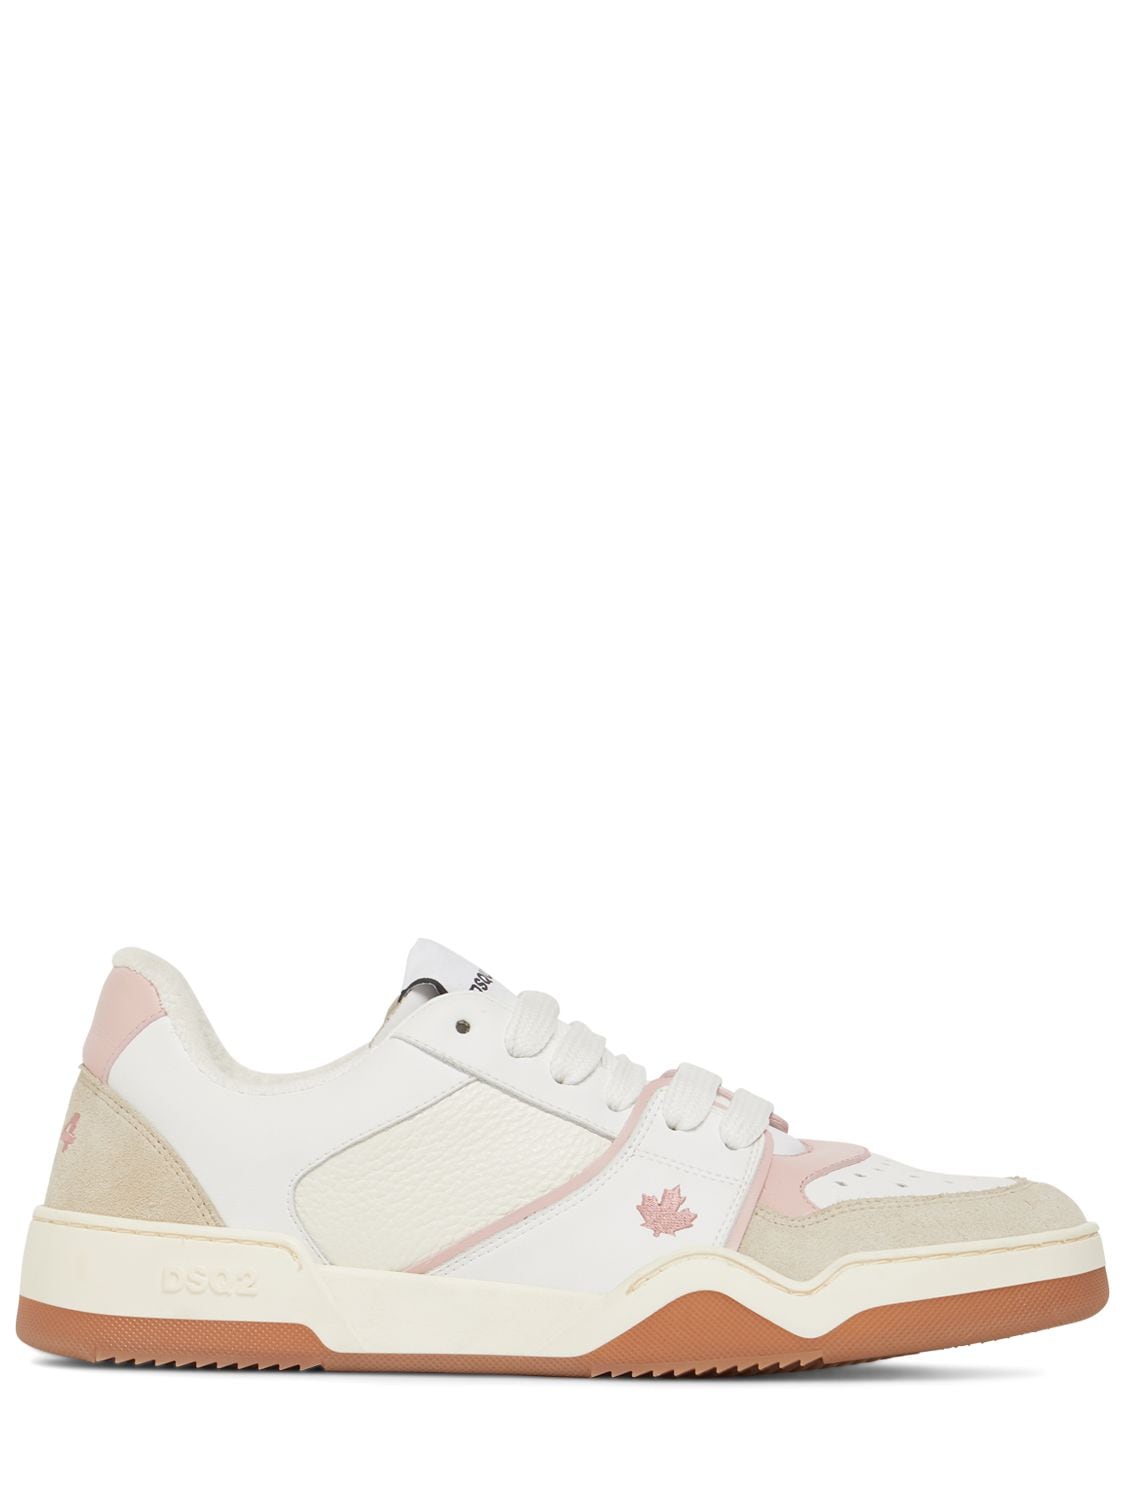 Canadian Leather Sneakers - DSQUARED2 - Modalova